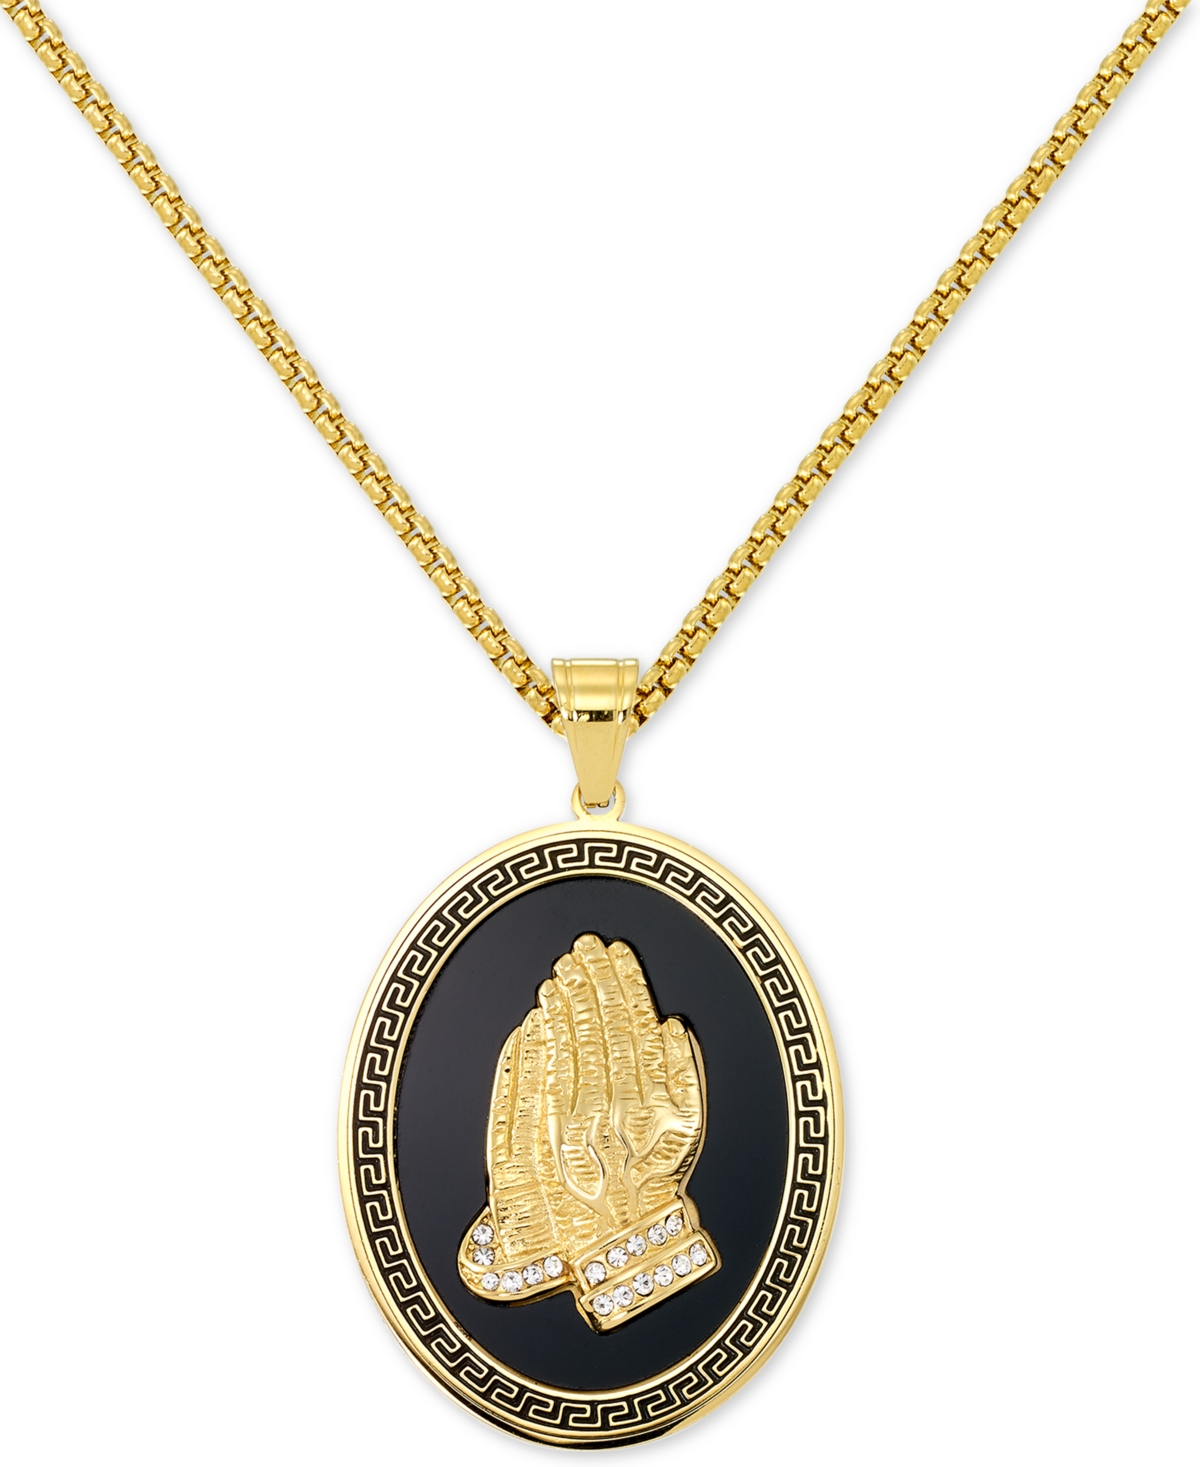 Legacy for Men by Simone I. Smith Men's Praying Hands 24" Pendant Necklace in Black Enamel & Yellow Ion-Plated Stainless Steel